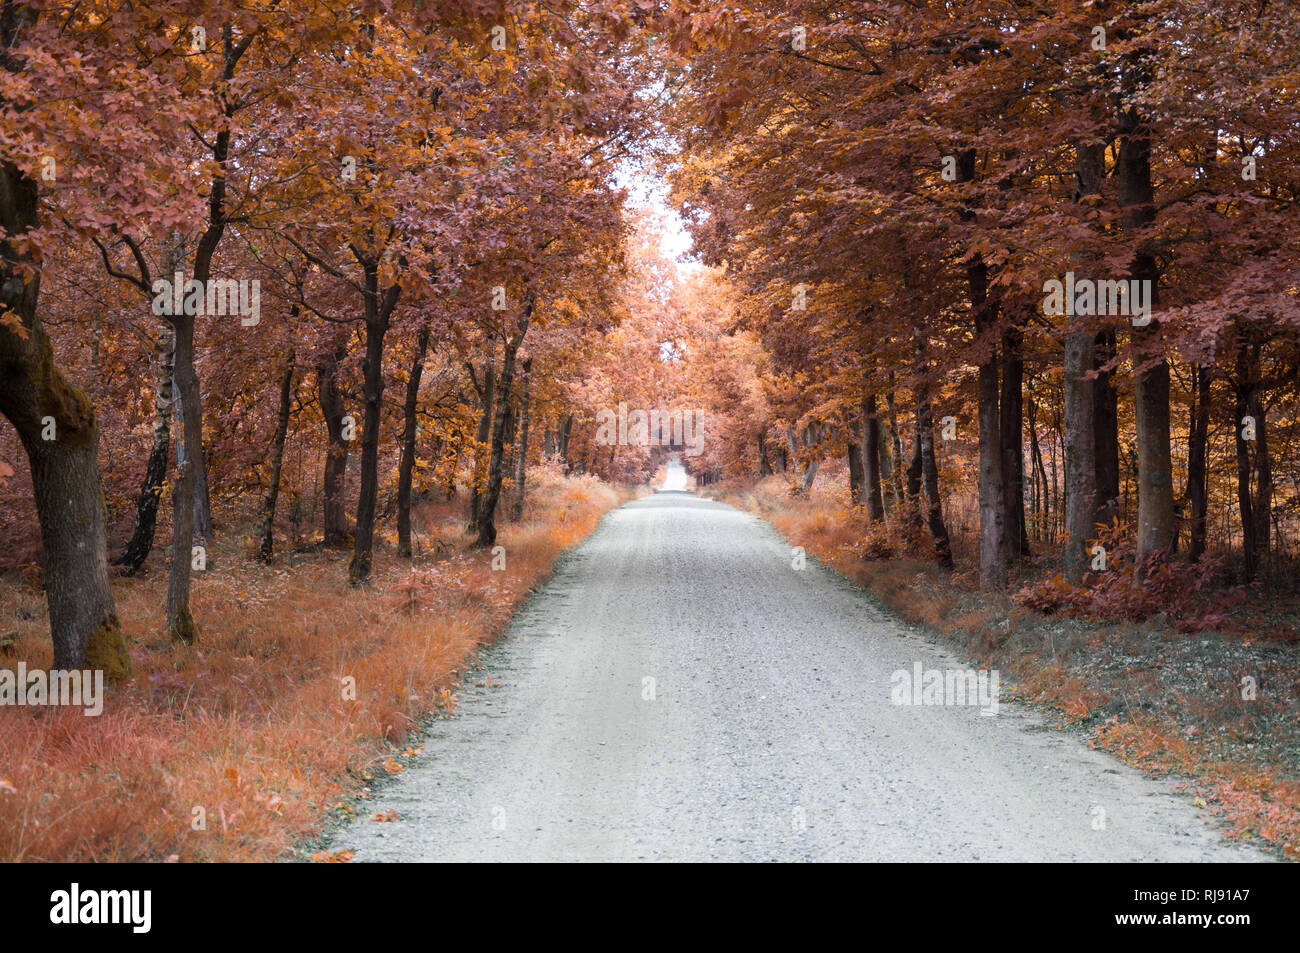 Red and colorful autumn colors in the forest with a road in the fall season our temperate seasons Stock Photo